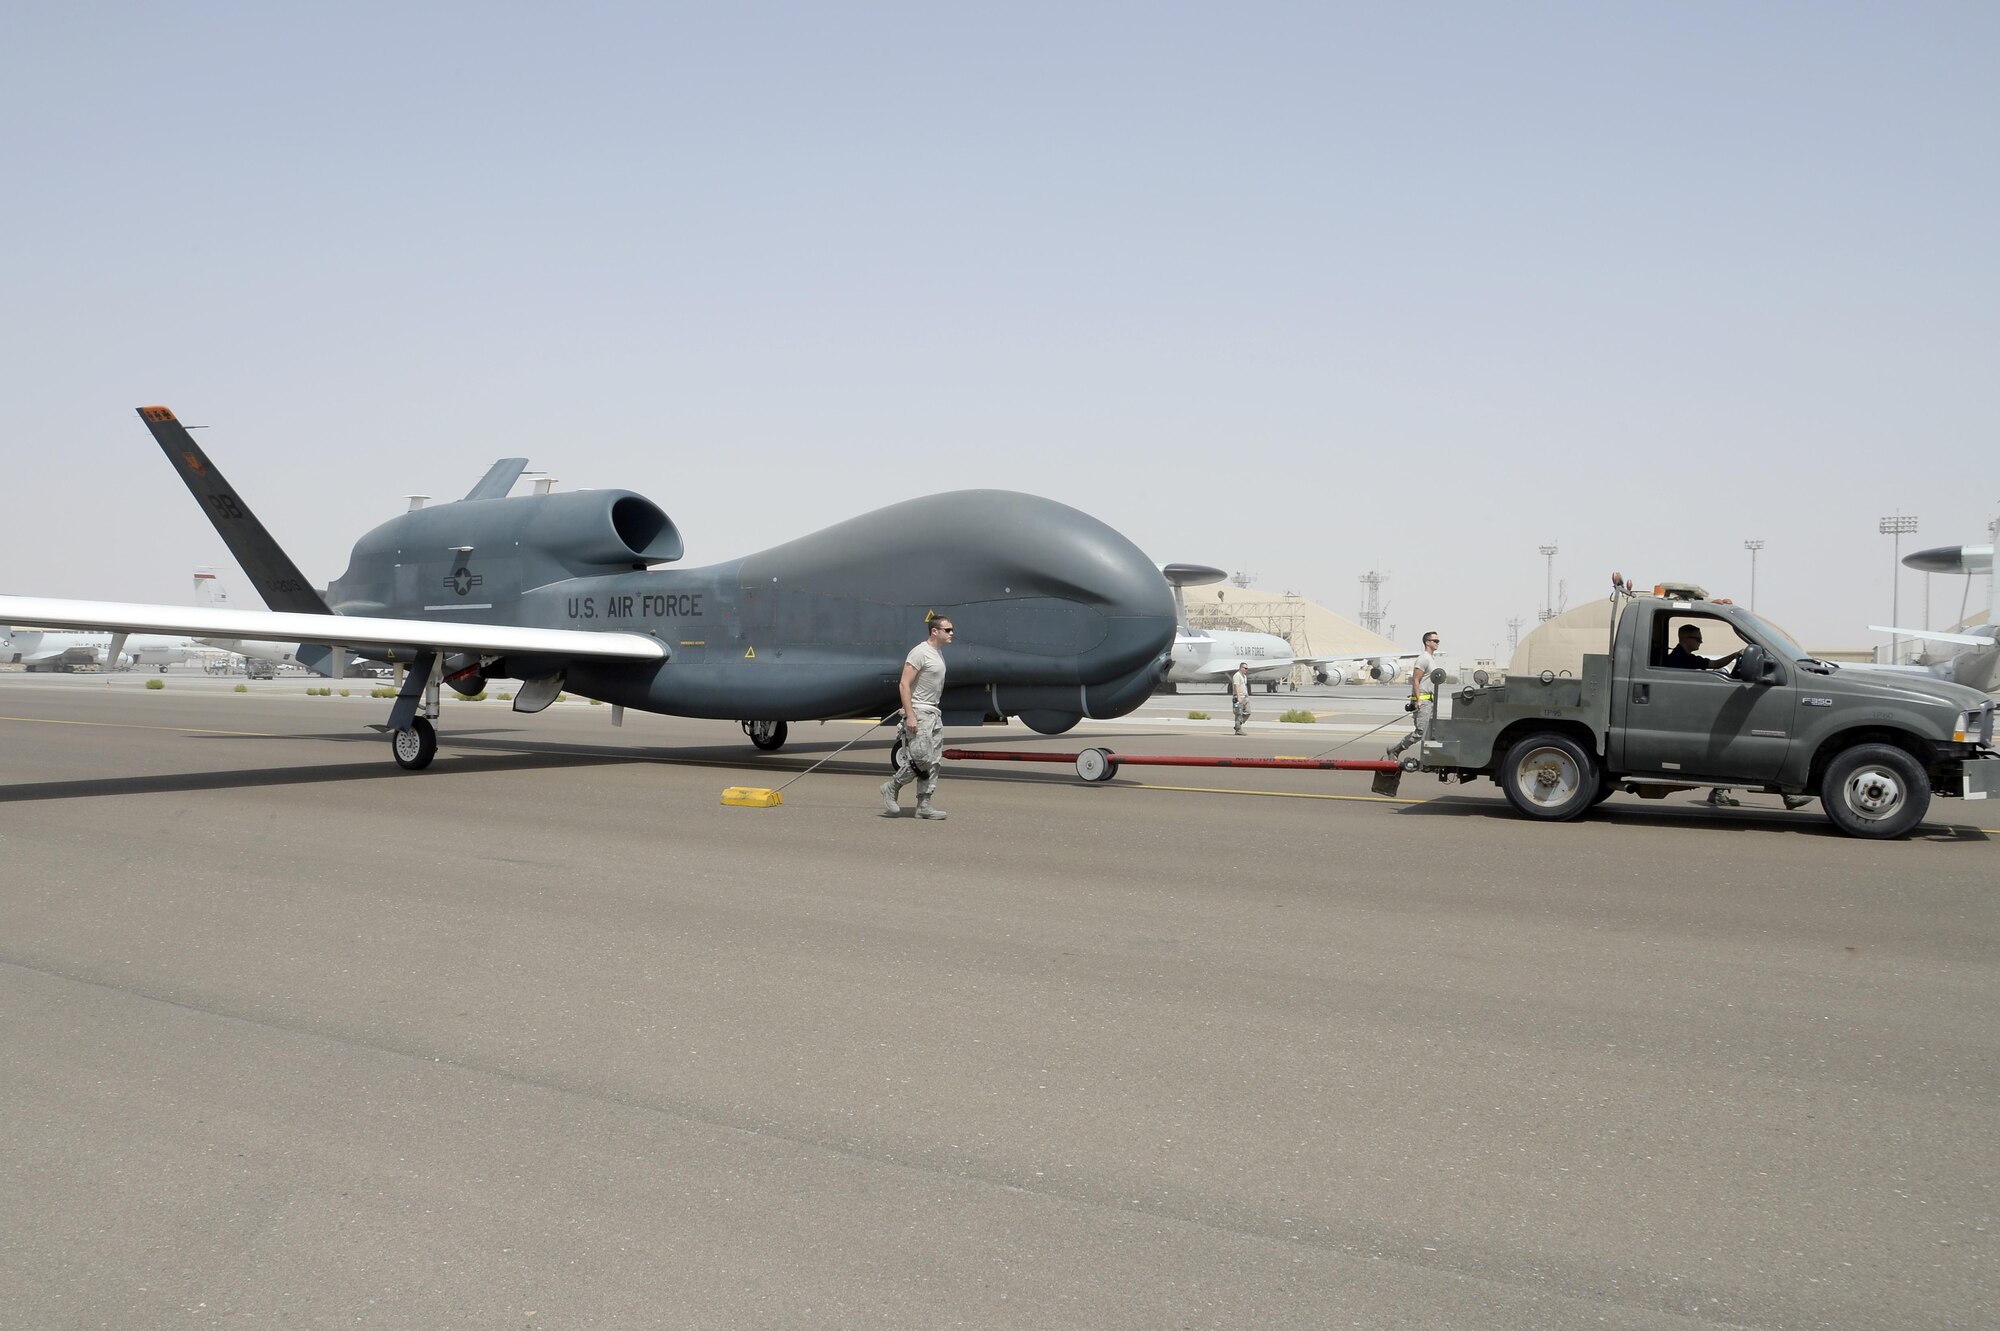 Airmen with the Hawk Aircraft Maintenance Unit walk in a RQ-4 Global Hawk after it landed from a 30.5 hour flight at an undisclosed location in Southwest Asia Mar. 8, 2015. This is one of three block 20 aircraft that carries the Battlefield Airborne Communication Node payload. (U.S. Air Force photo/Tech. Sgt. Marie Brown)